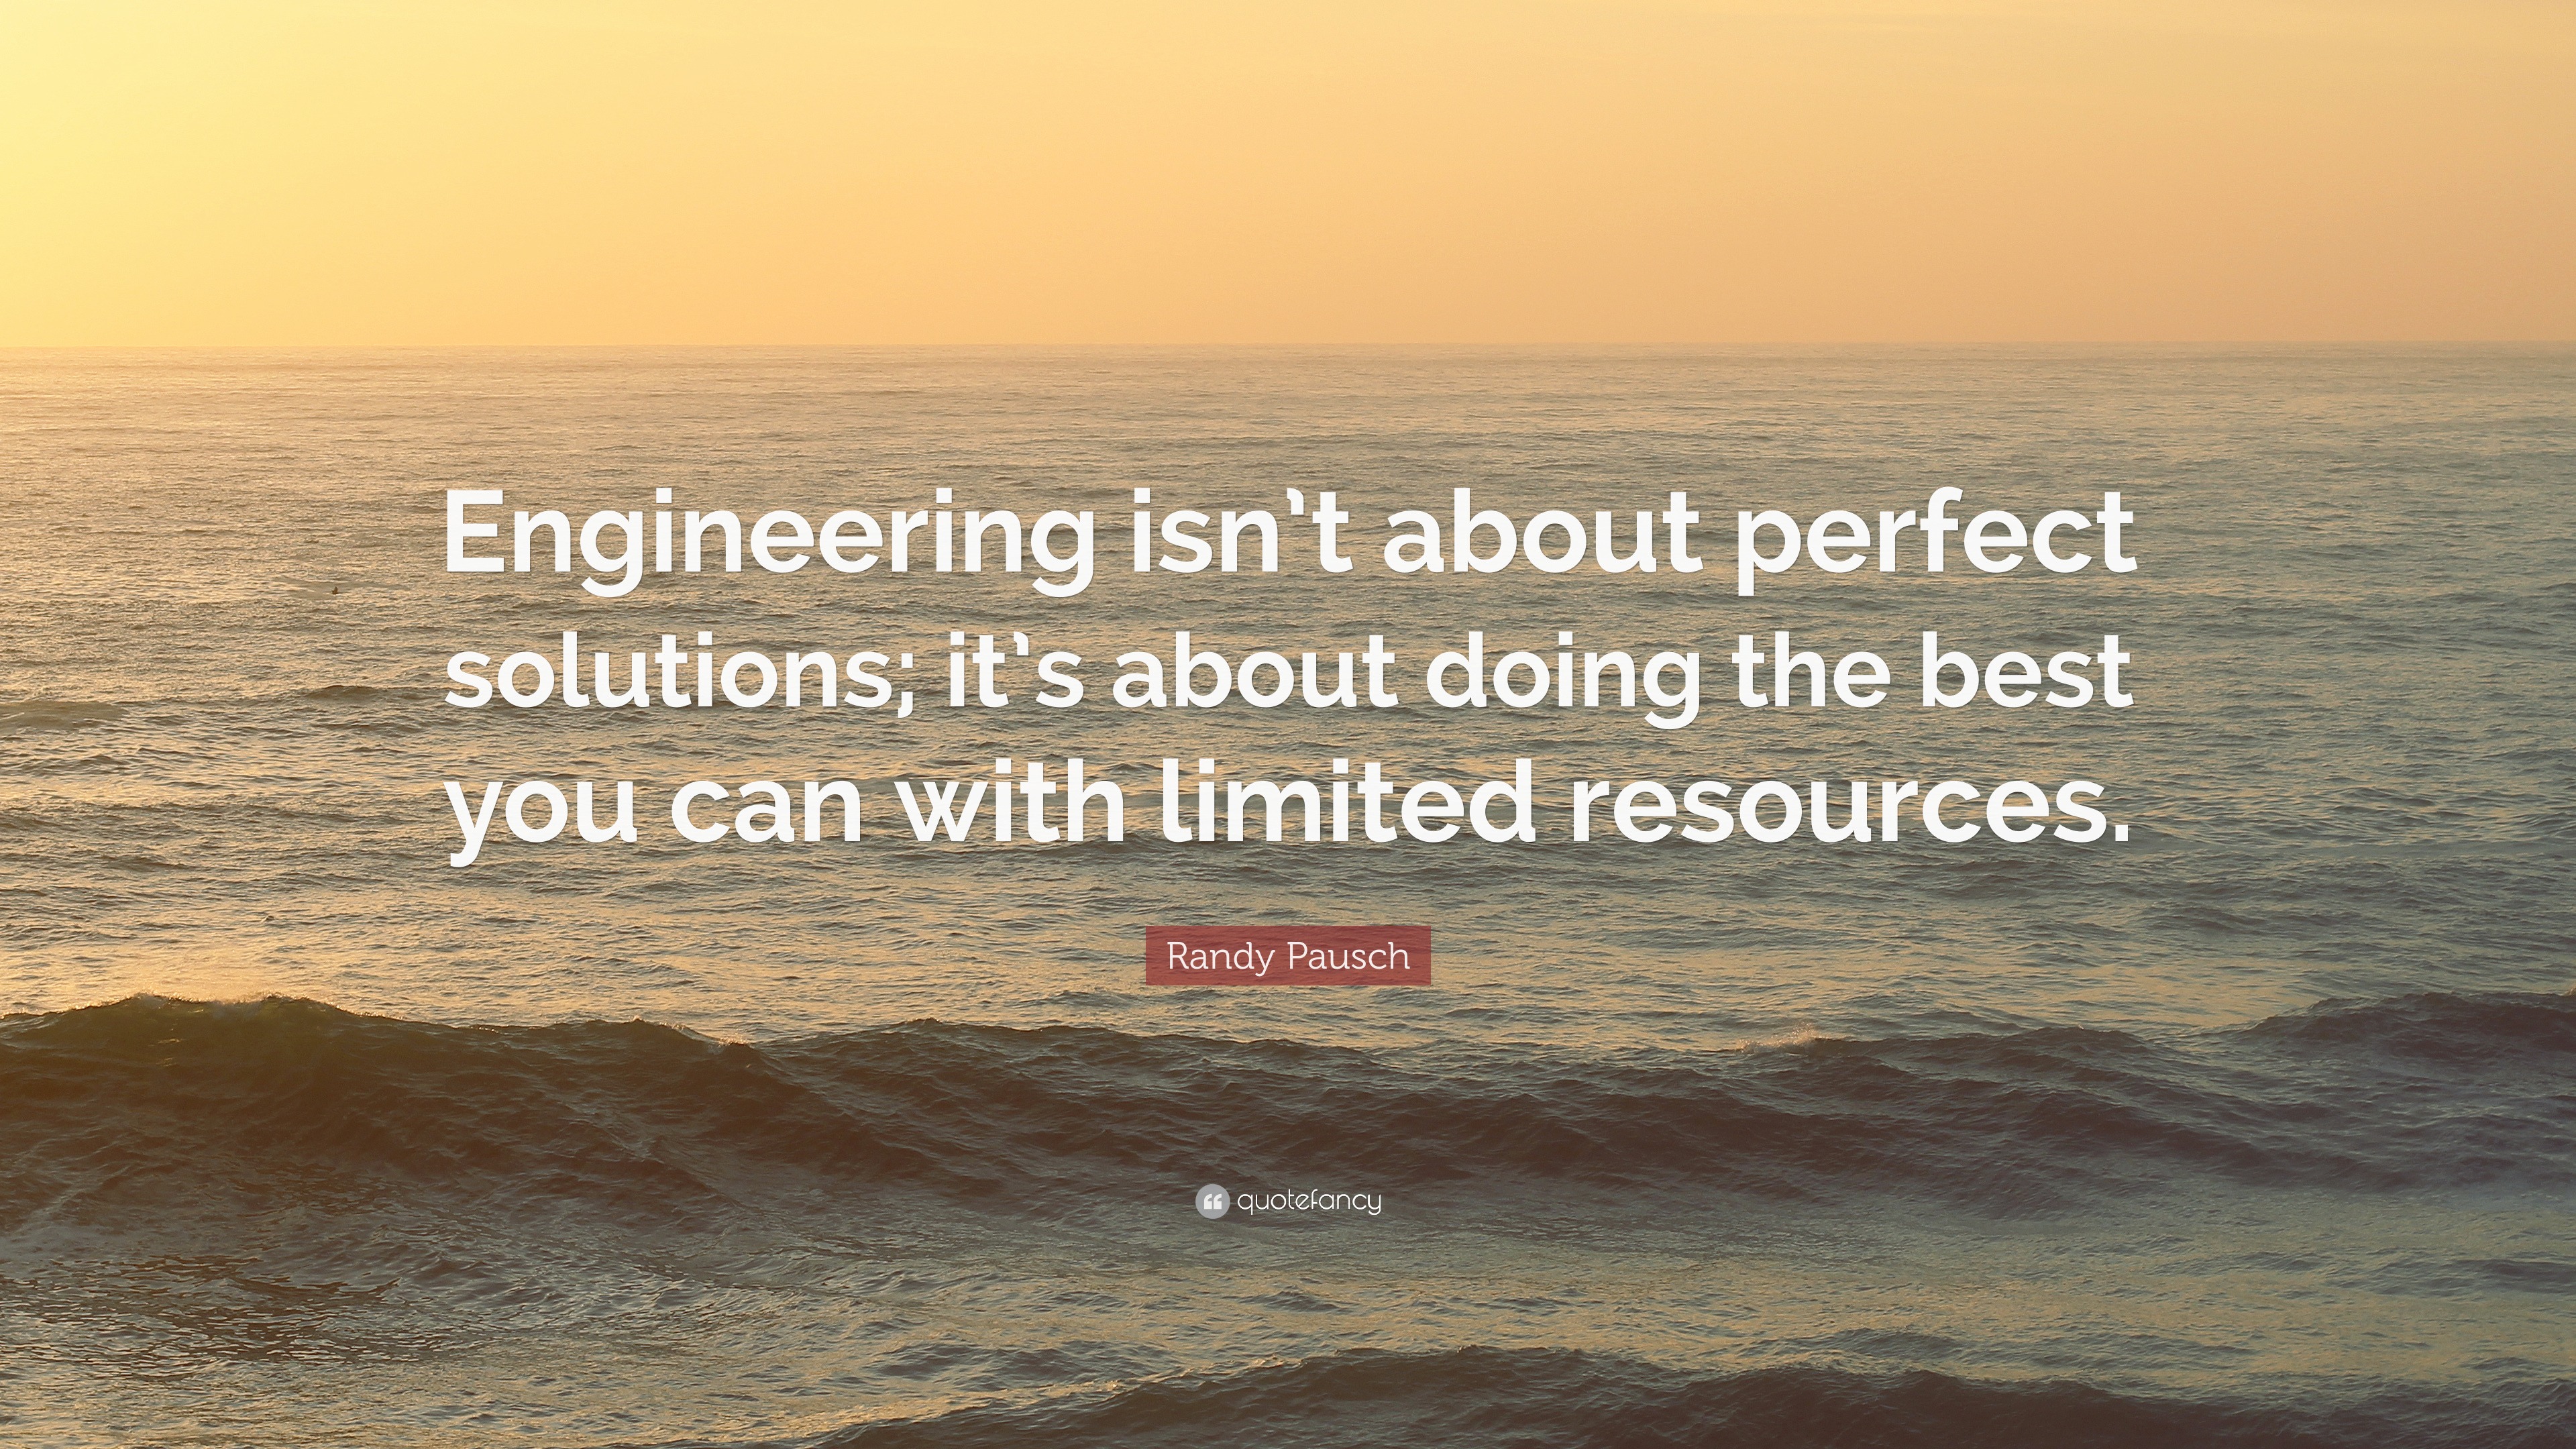 Randy Pausch Quote: “Engineering isn’t about perfect solutions; it’s